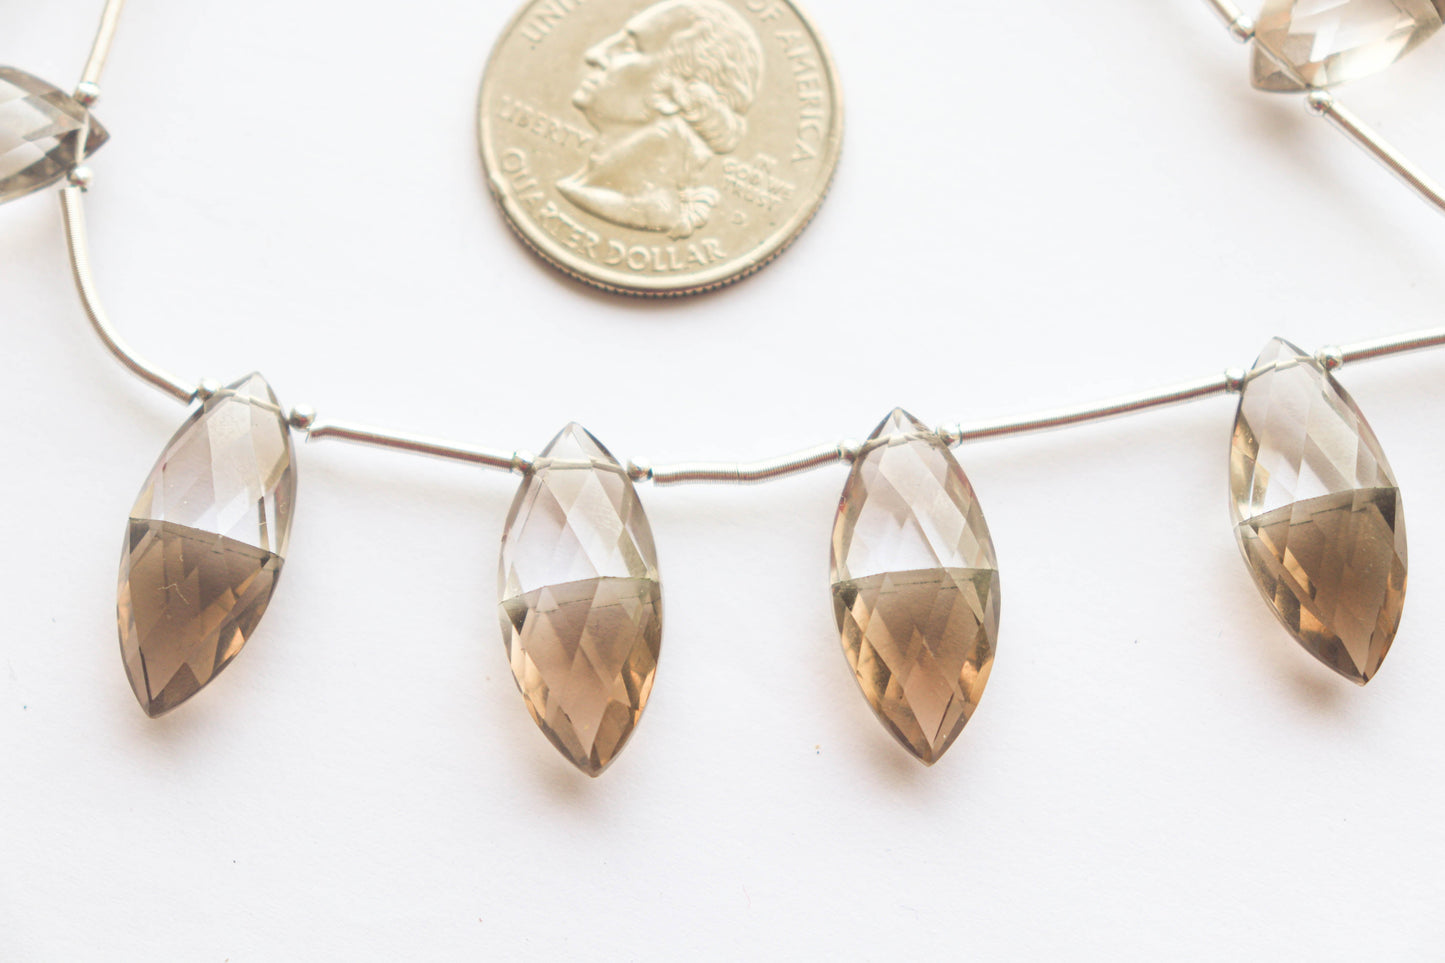 Crystal & Smoky Quartz Combination faceted beads Marquise Shape | 10x22mm | 10 Pieces | 8 inch String | Beadsforyourjewellery Beadsforyourjewelry